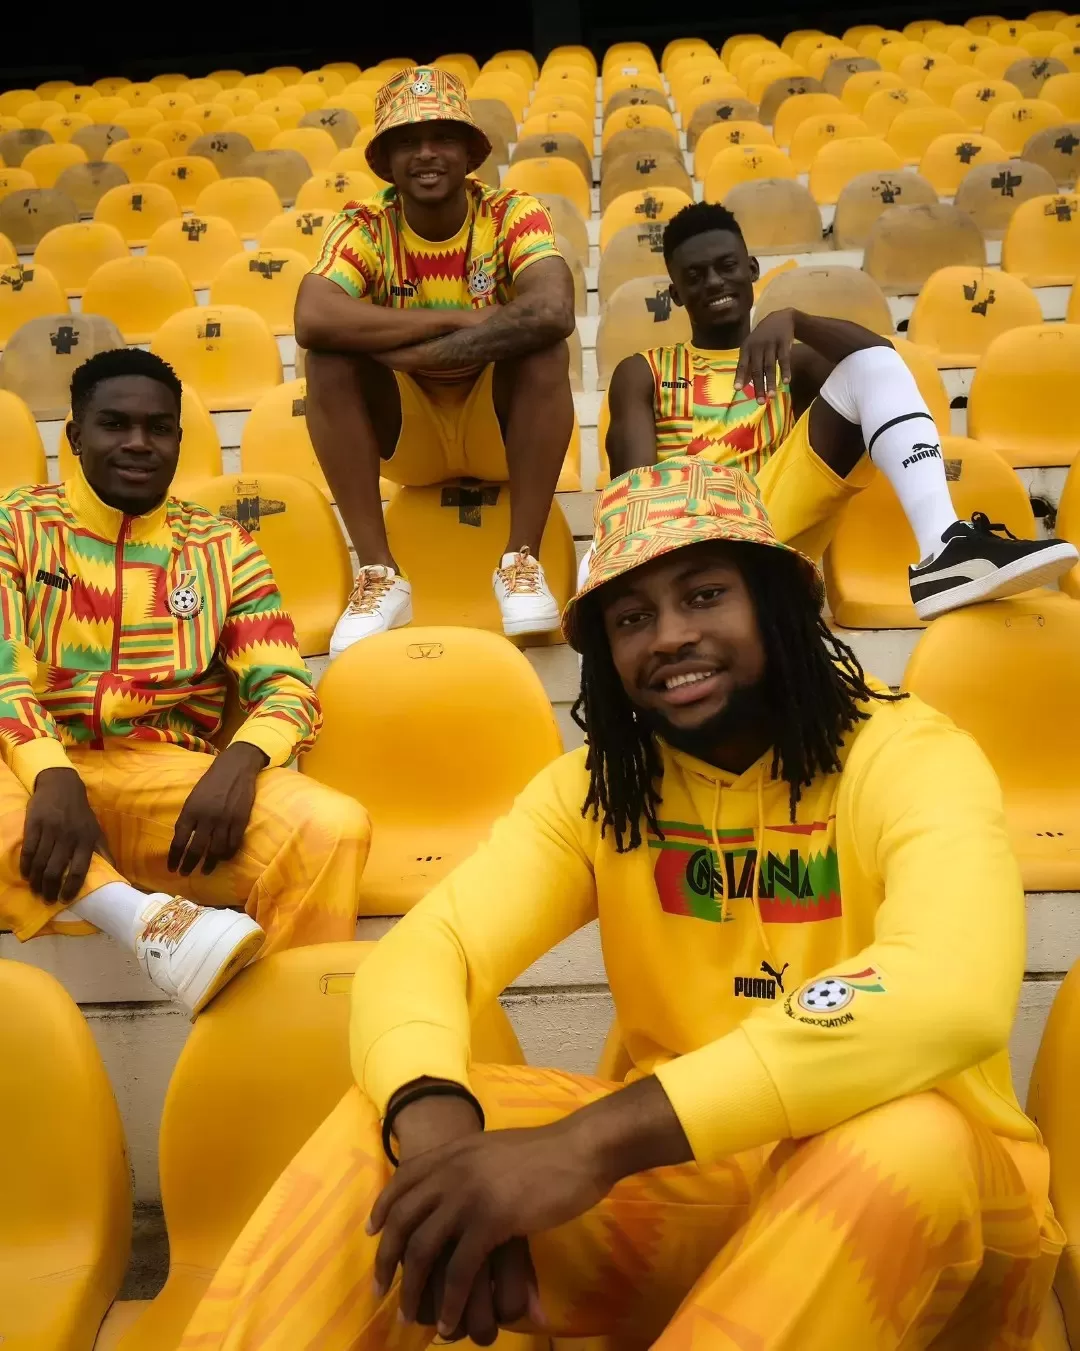 The fanwear collection is available in a range of patterns and styles, with the prominent colours of the Ghanaian flag being red, yellow, and green. Antoine Semenyo, Mohammed Kudus, and Baba Iddrisu were photographed wearing the new fanwear during the reveal event, displaying their enthusiasm and support for this fantastic release.